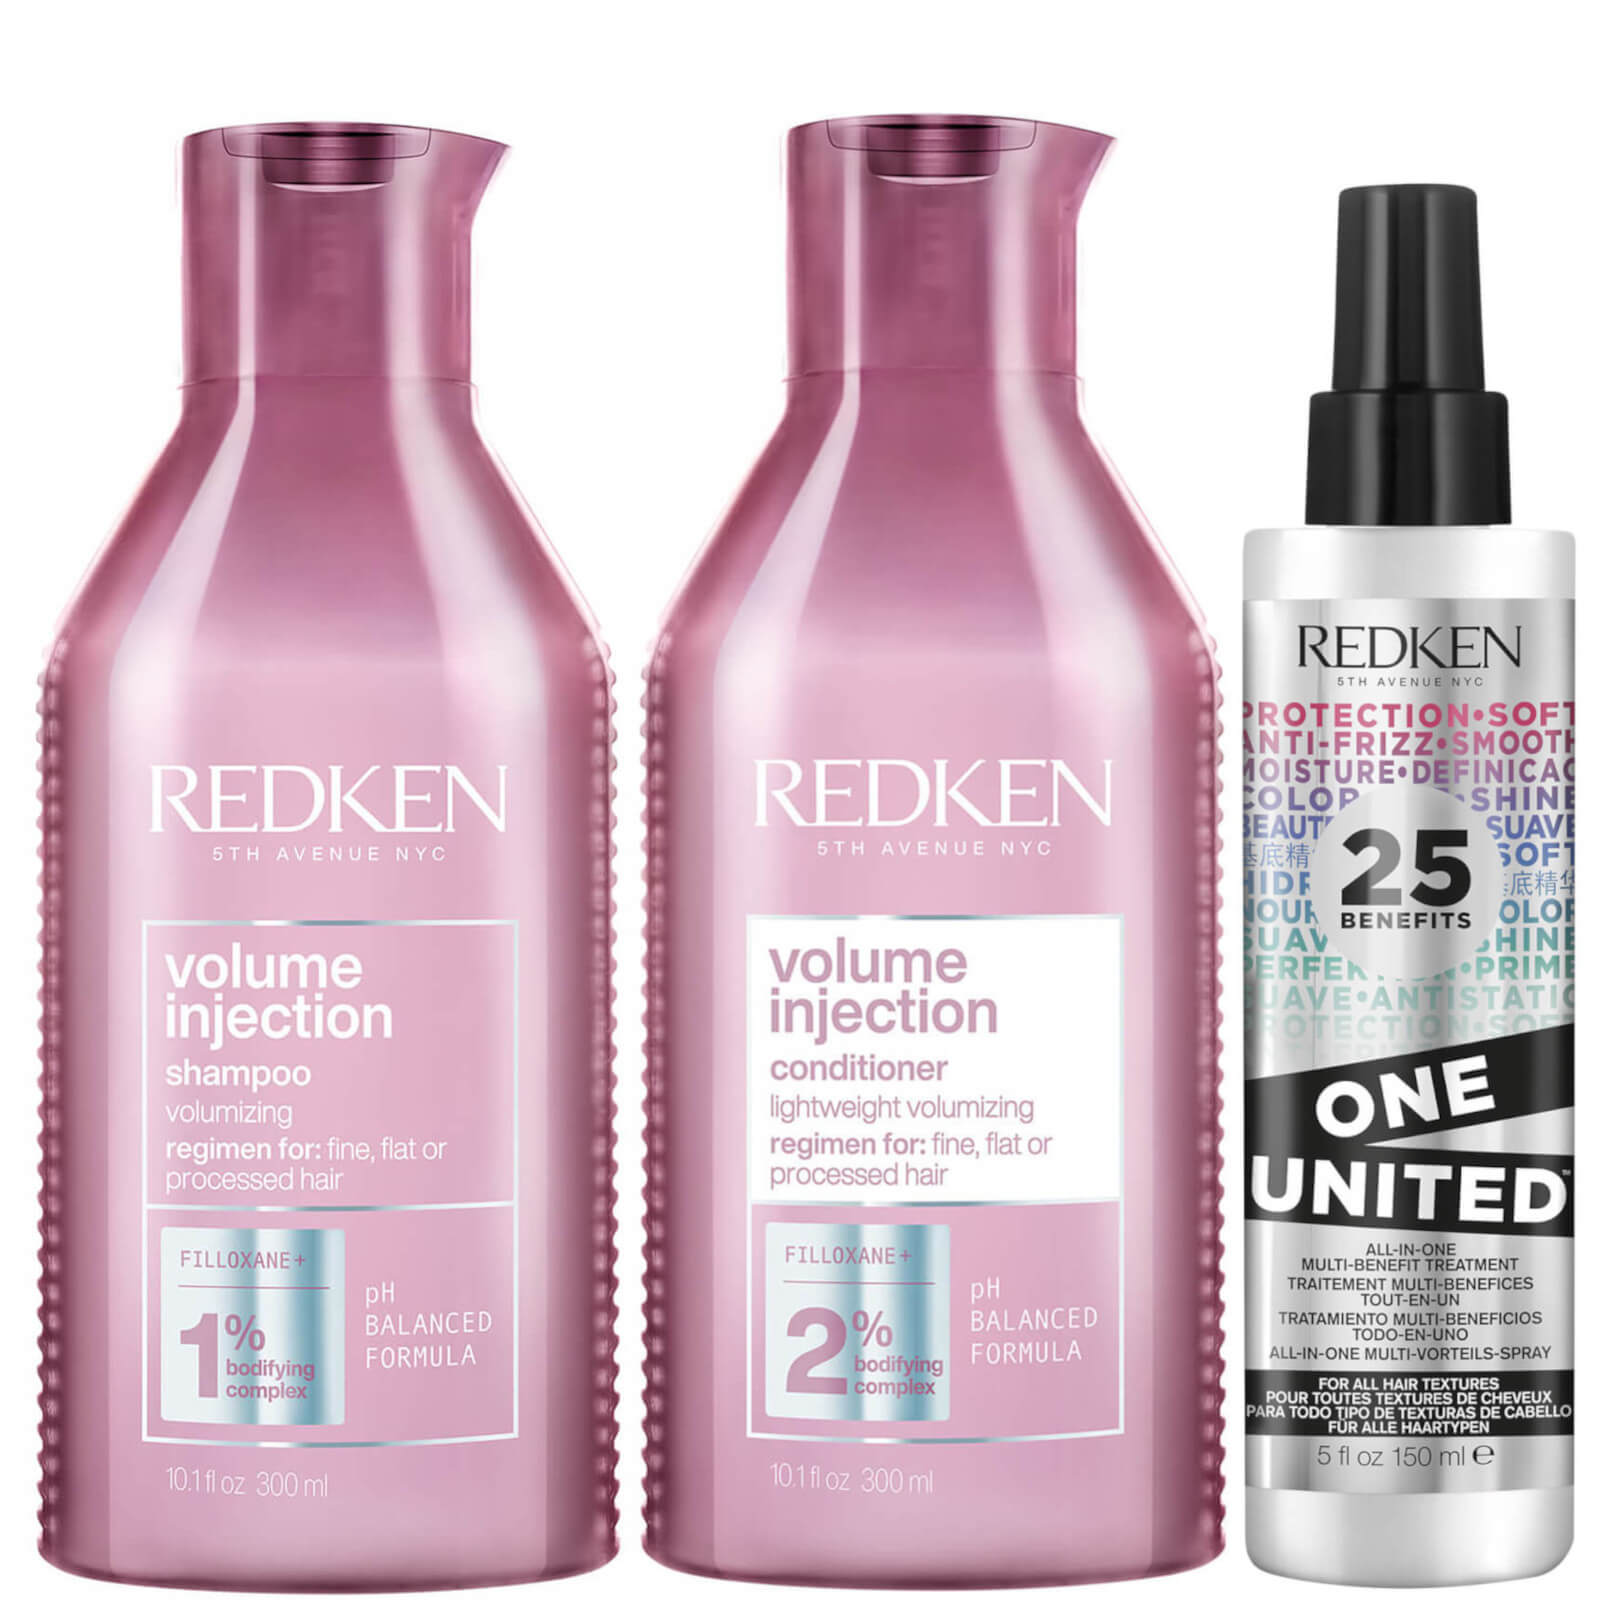 Redken Volume Injection Shampoo, Conditioner and One United Treatment Spray Routine for Fine/Flat Ha